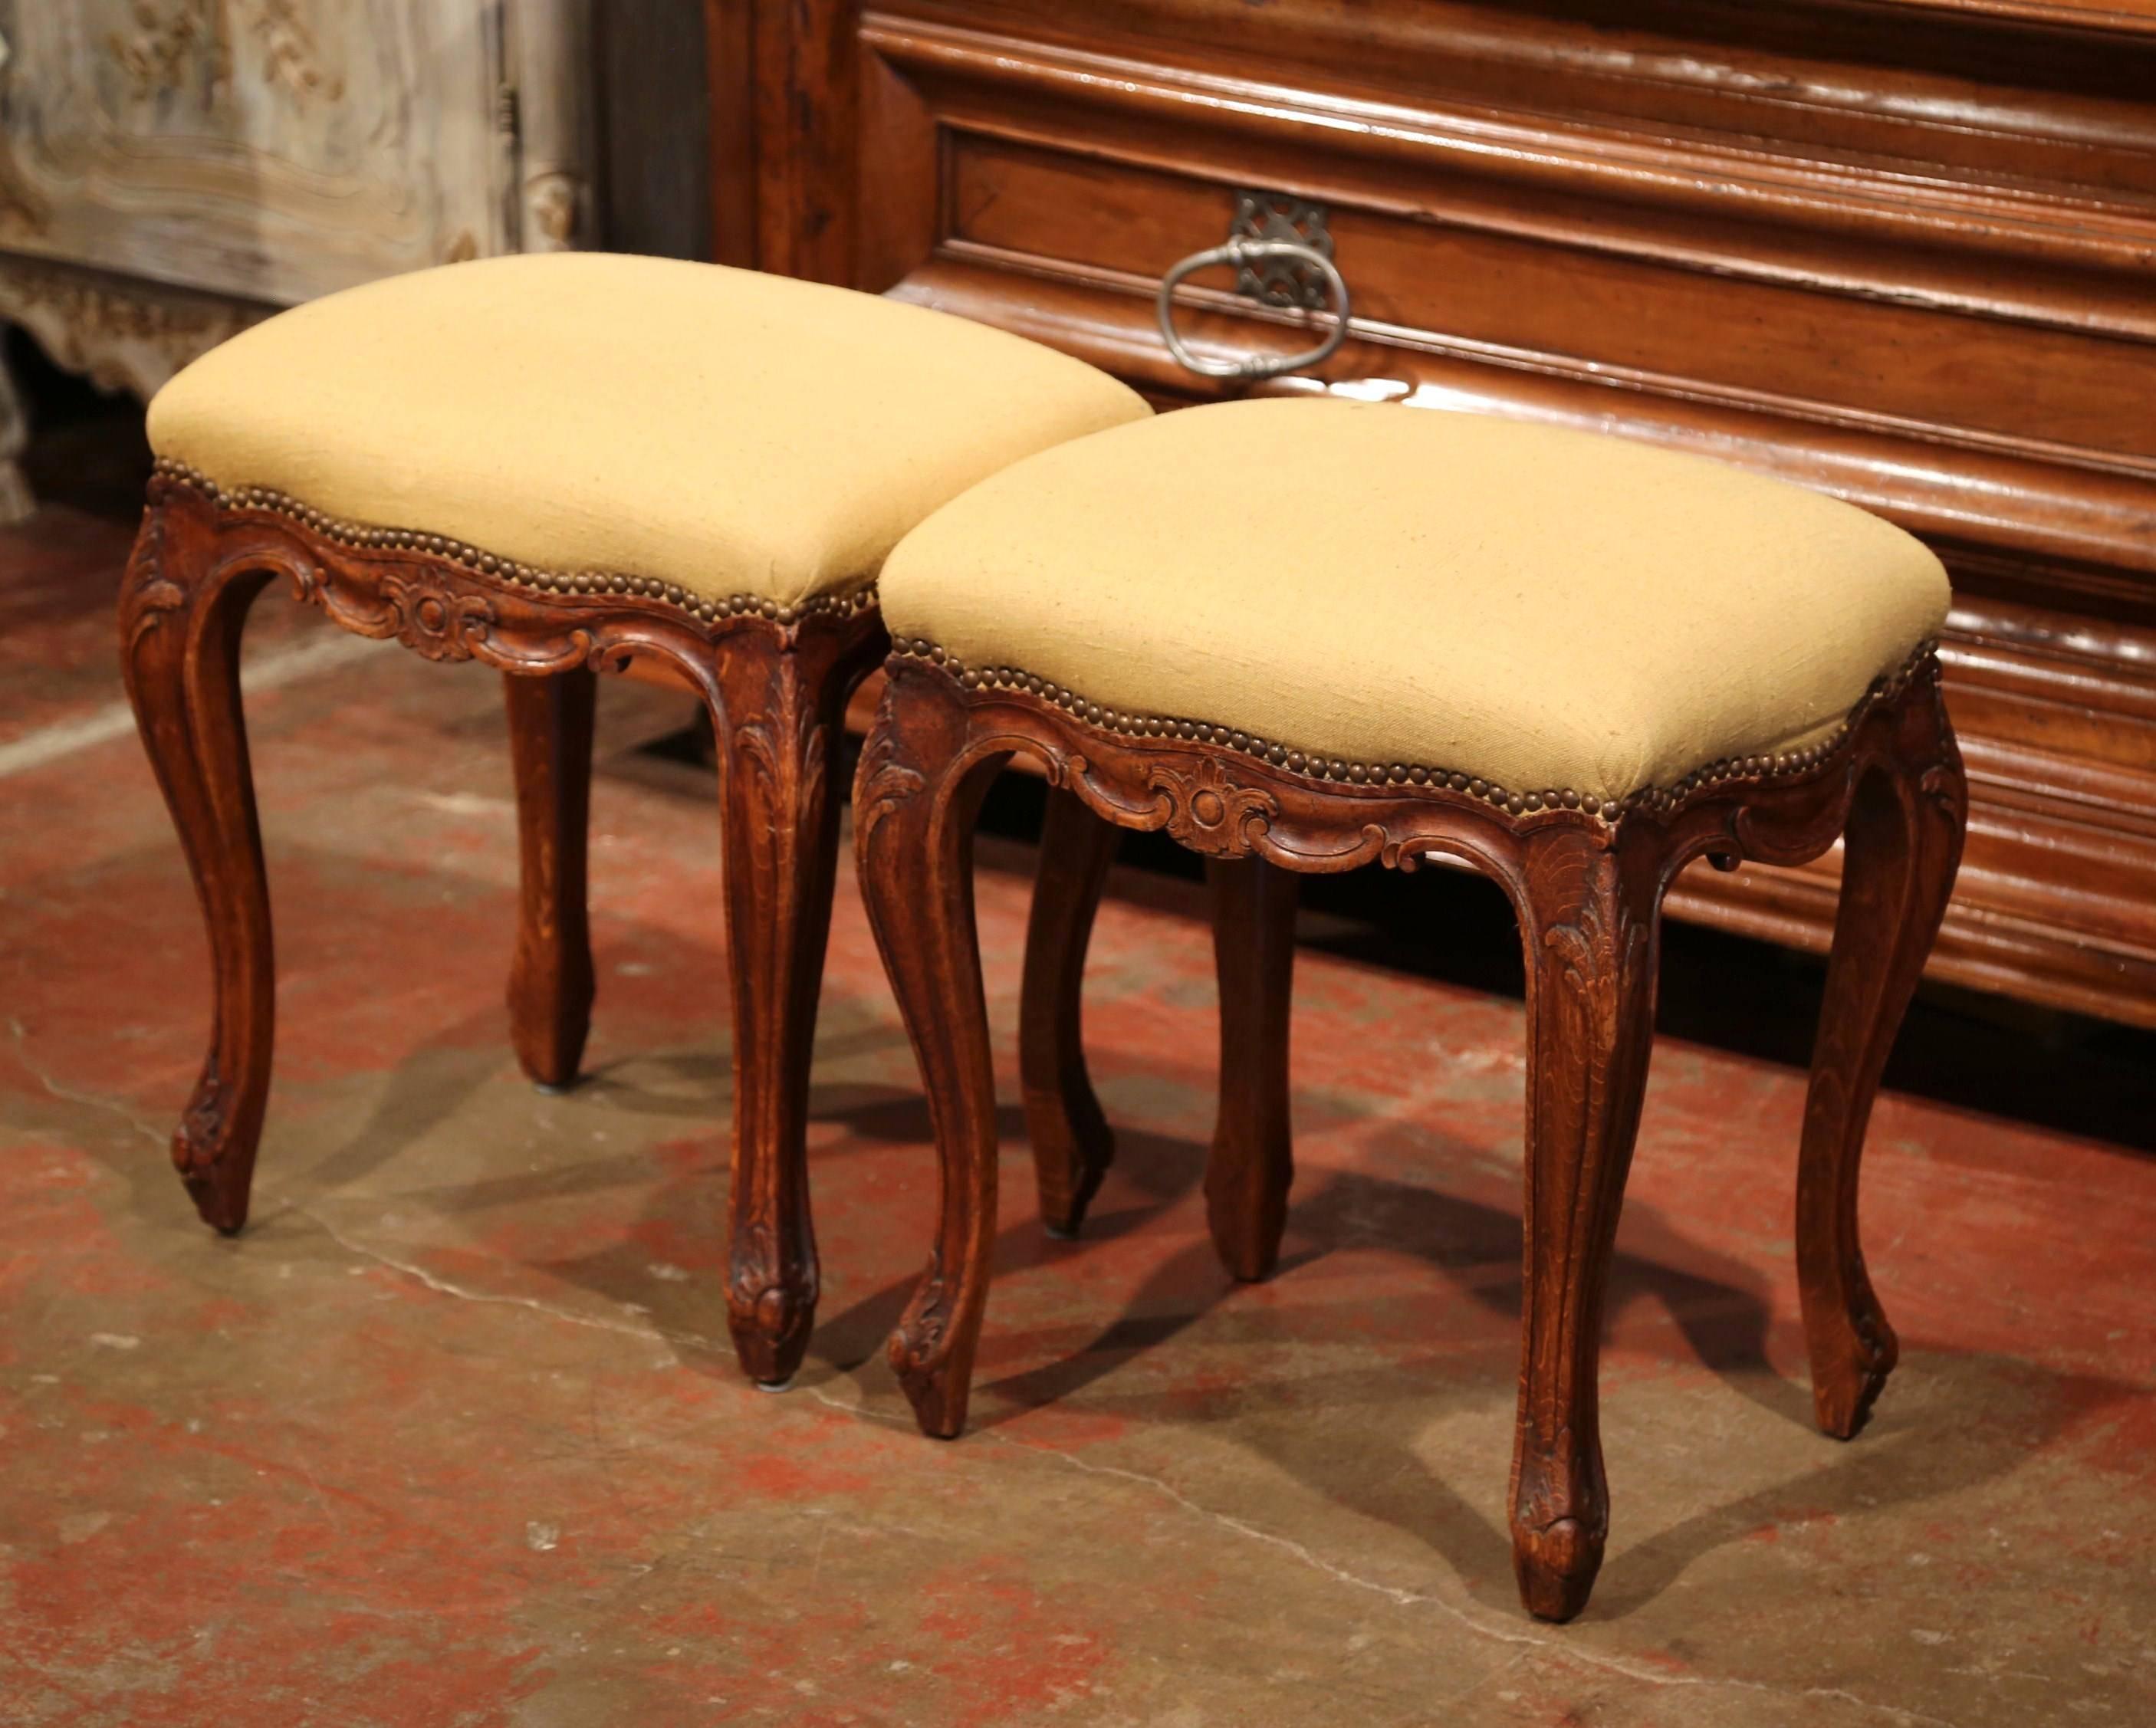 Elegant pair of antique stools from Normandy, France; crafted circa 1920, the seating pieces features fine carvings around the curved and shaped apron, four cabriole legs with acanthus leaves over the feet. The hand carved stools are upholstered